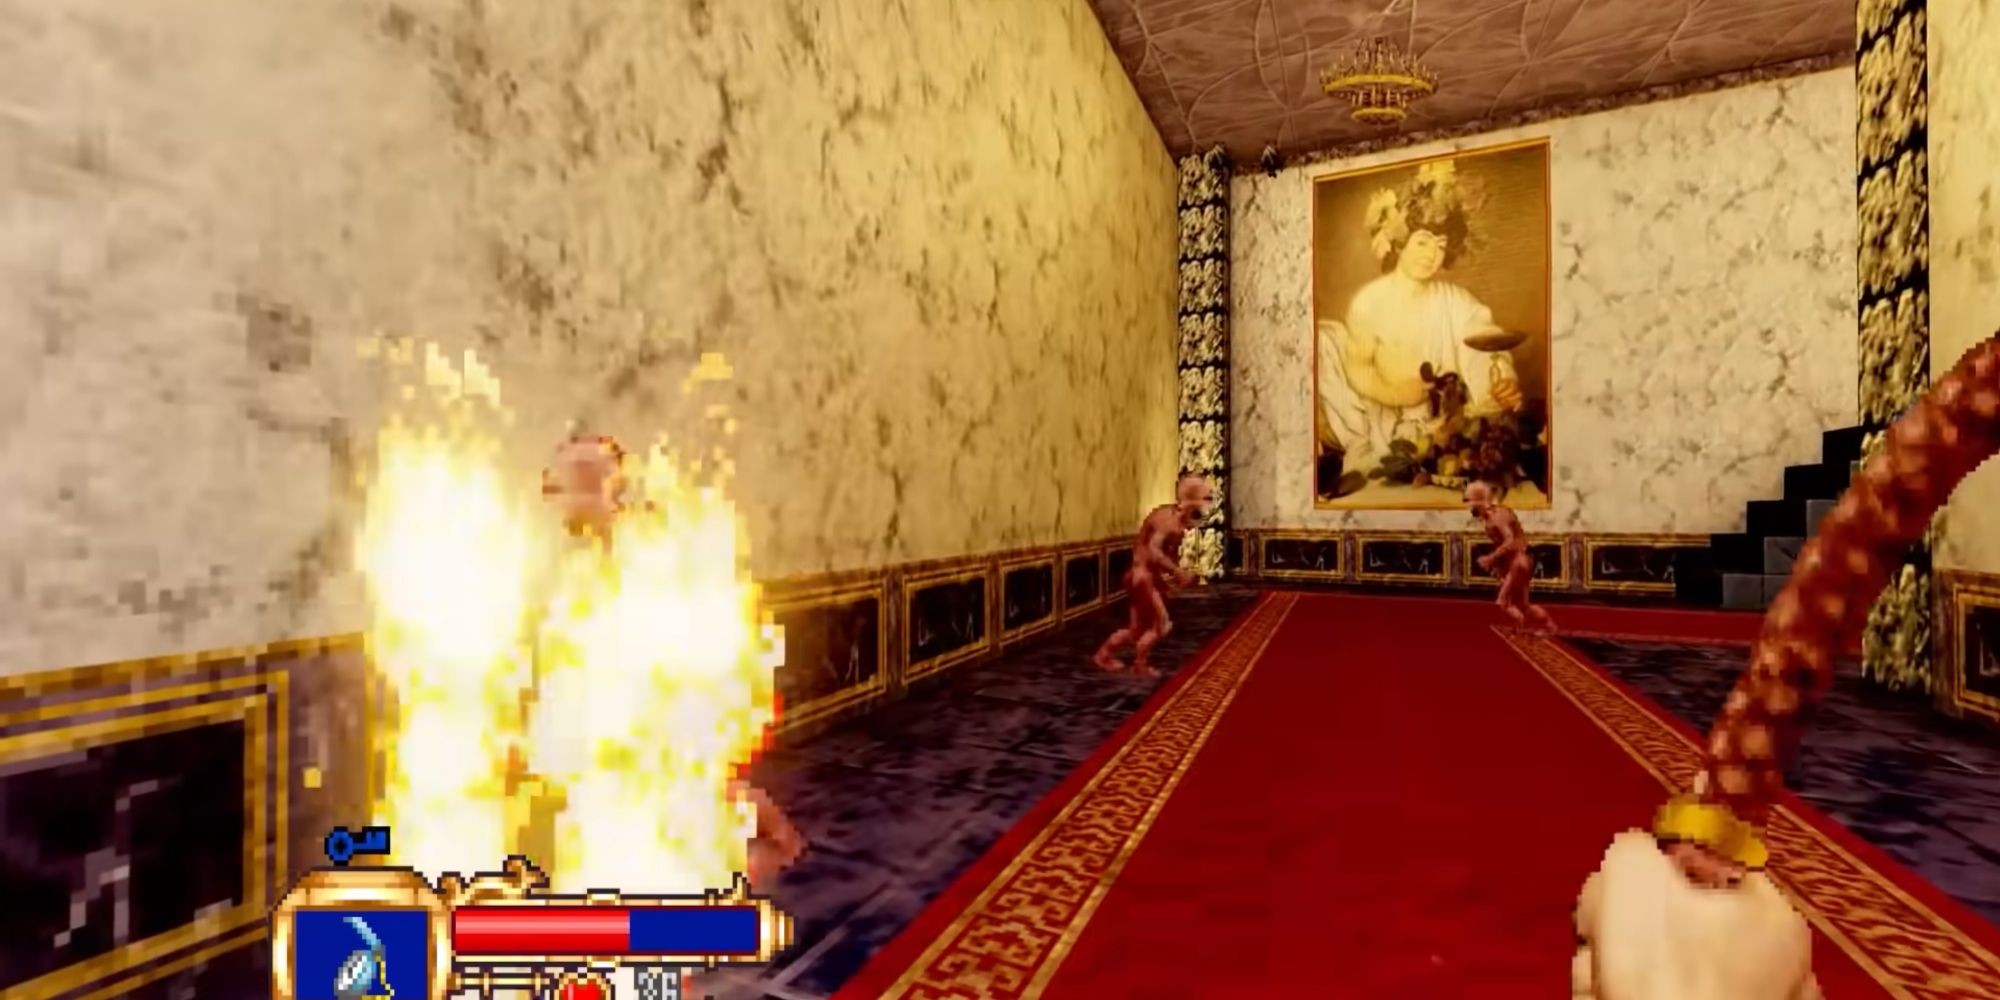 The player character in the first-person flailing a whip with enemies down the hall and one on fire, with UI appearing on-screen.